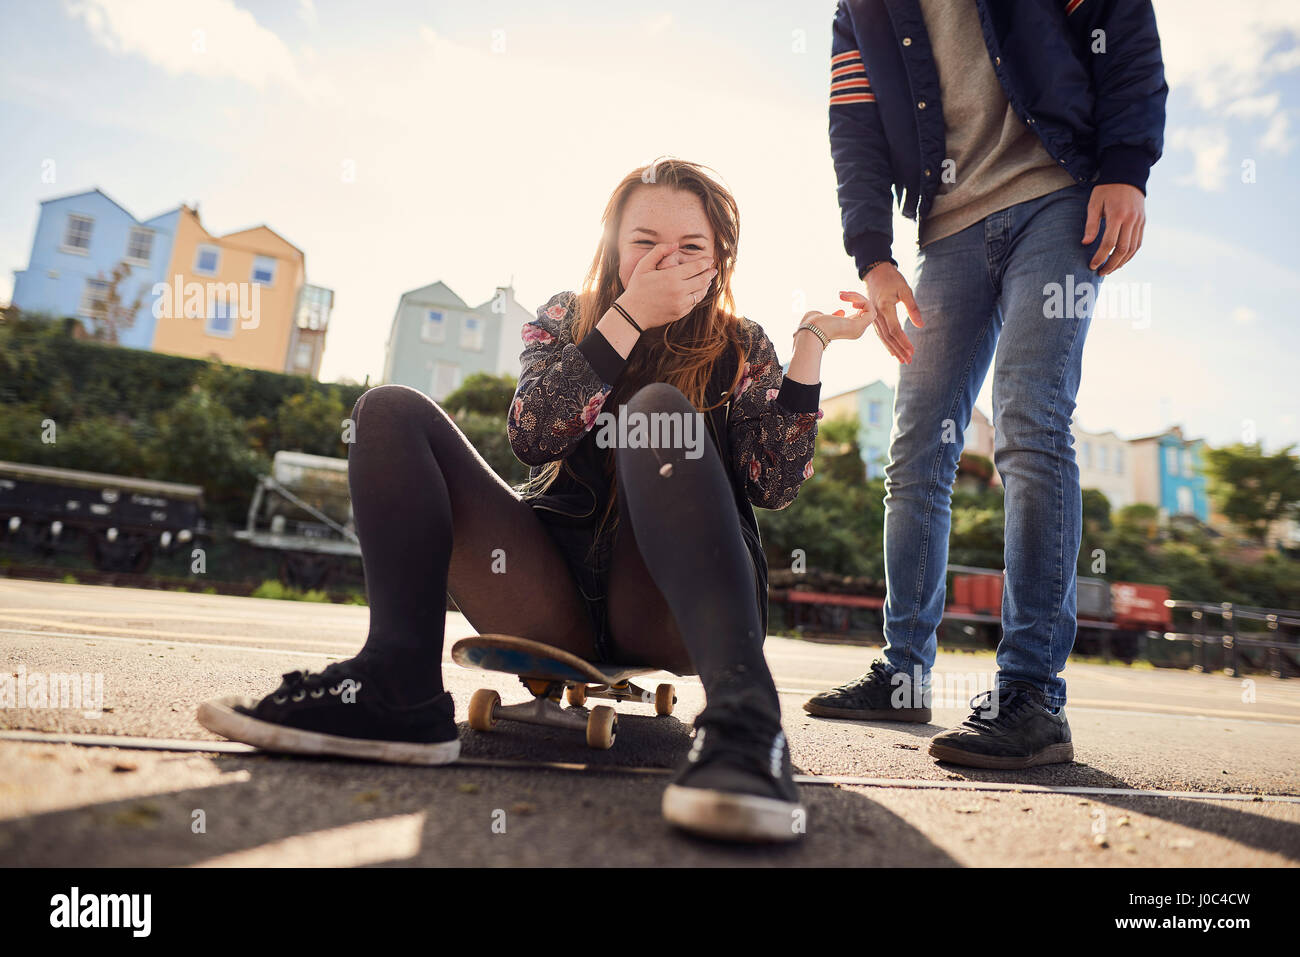 Two friends fooling around outdoors, young woman sitting on skateboard, laughing, low section, Bristol, UK Stock Photo